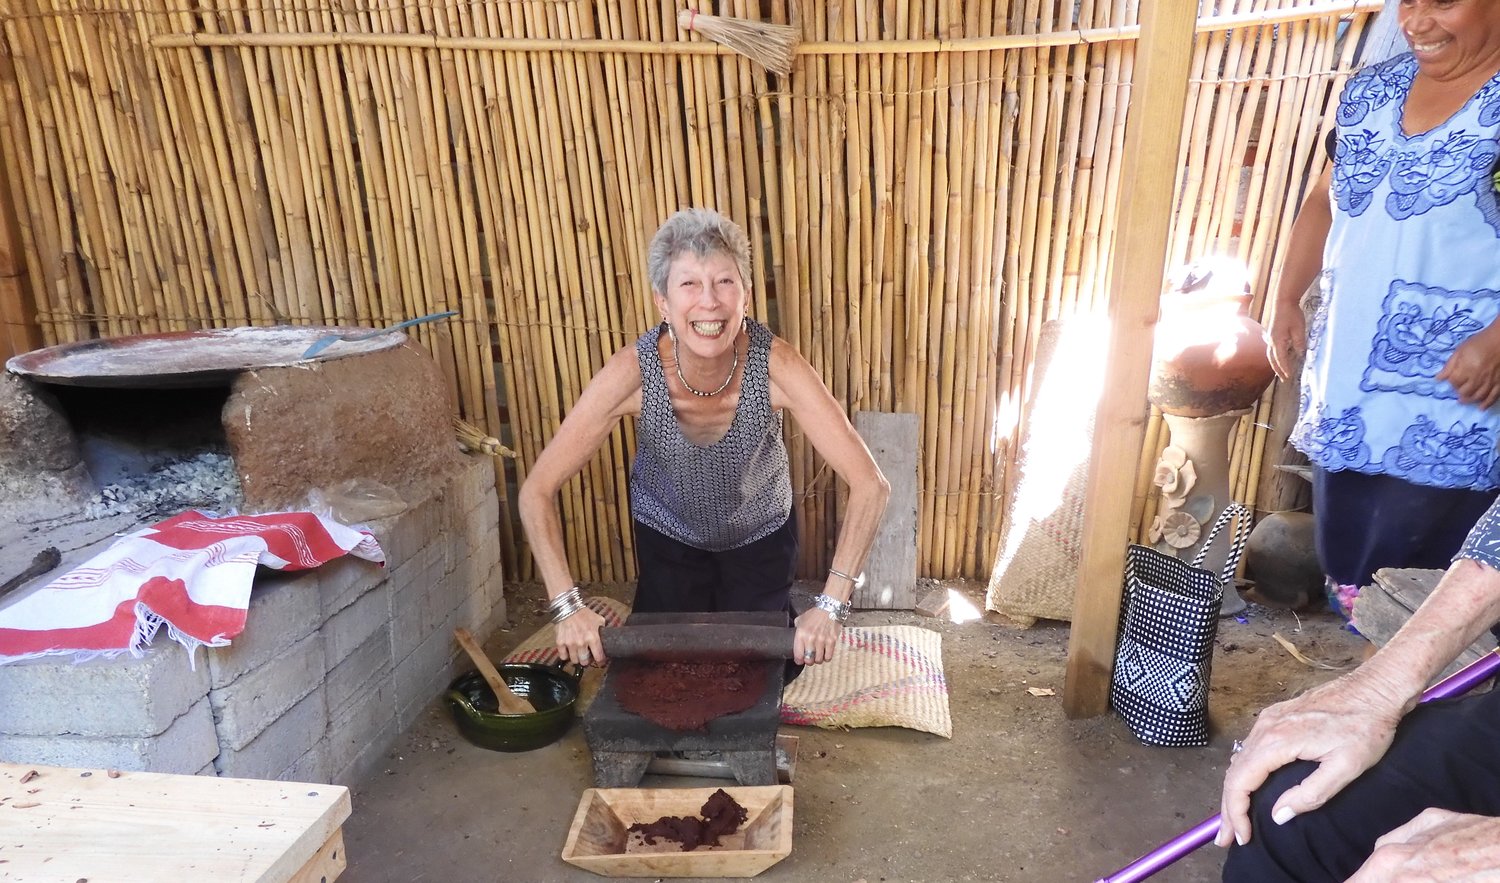 The author attempts to grind cocoa beans.